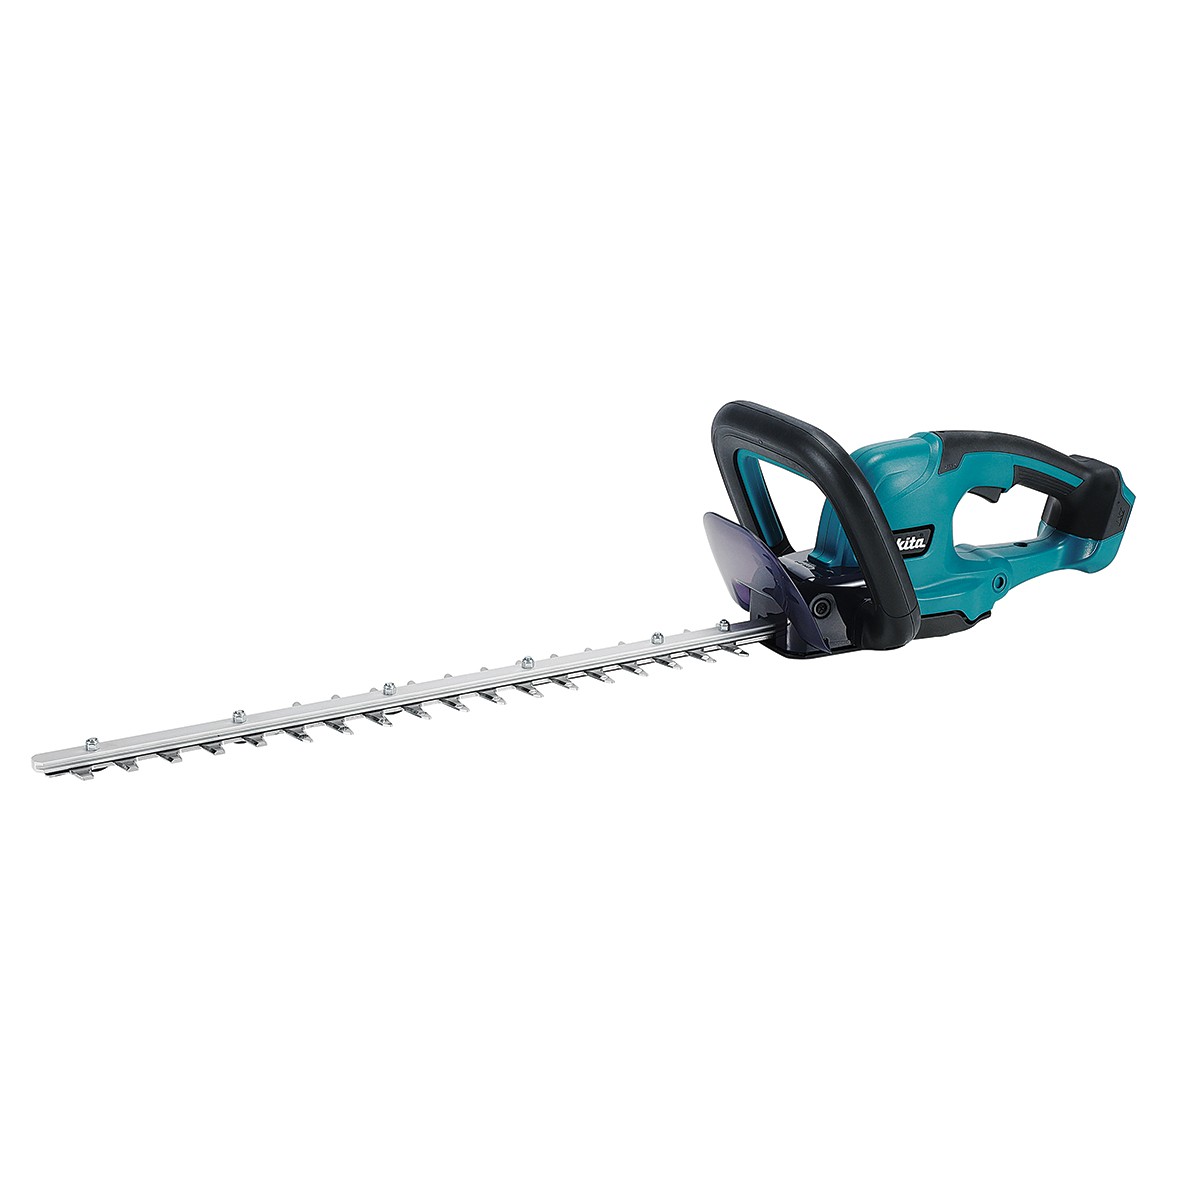 18V 500mm Hedge Trimmer Bare (Tool Only) DUH507Z by Makita